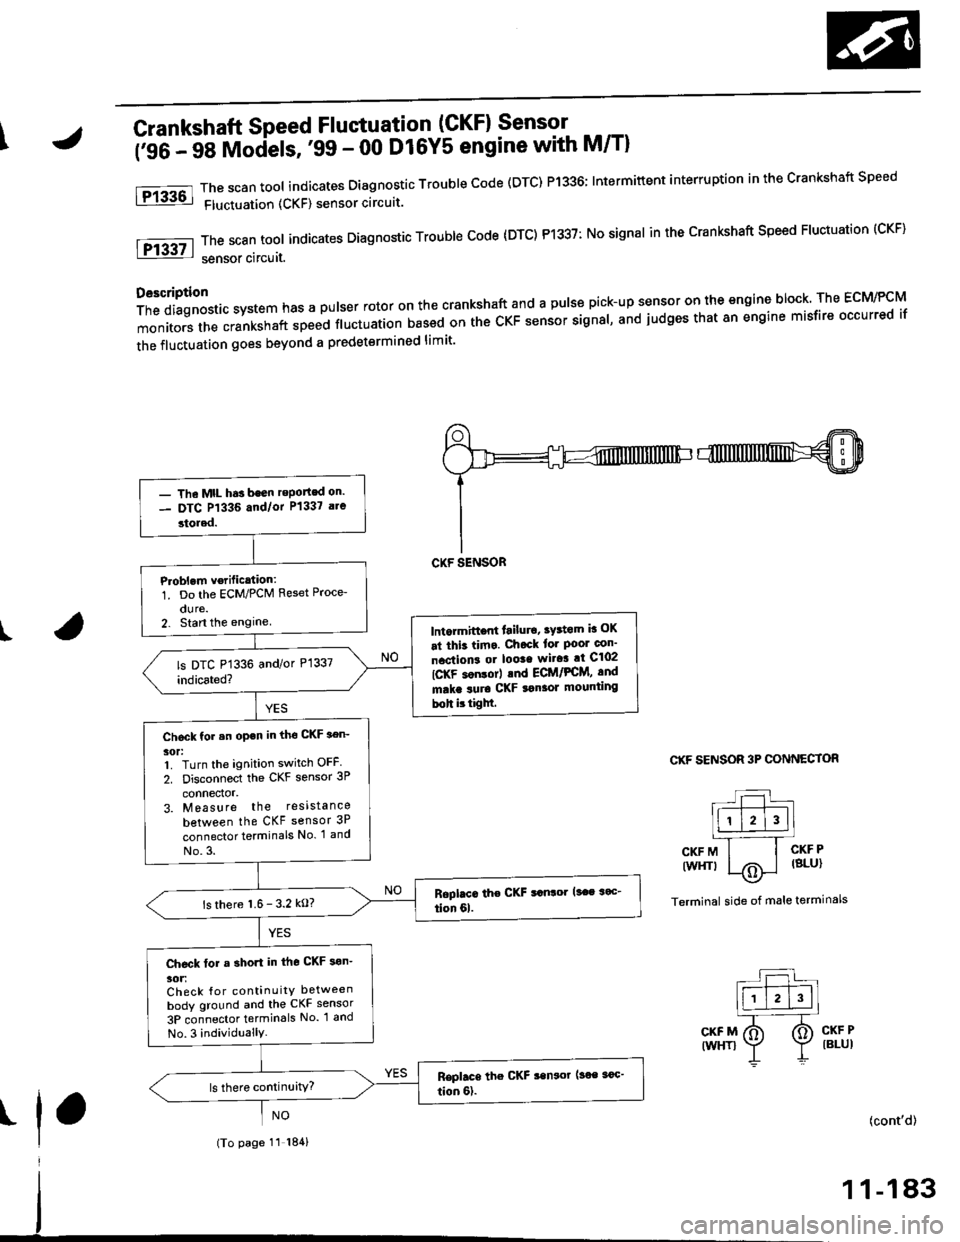 HONDA CIVIC 1998 6.G Service Manual \Crankshaft Speed Fluctuation (GKFI Sensor .
firC- 48 Models, 99 - 00 D16Y5 engine with M/Tl
The scan tool indicates Diagnostic Trouble Code (DTC) P1336; Intermiftent interruption in the Crankshaft S